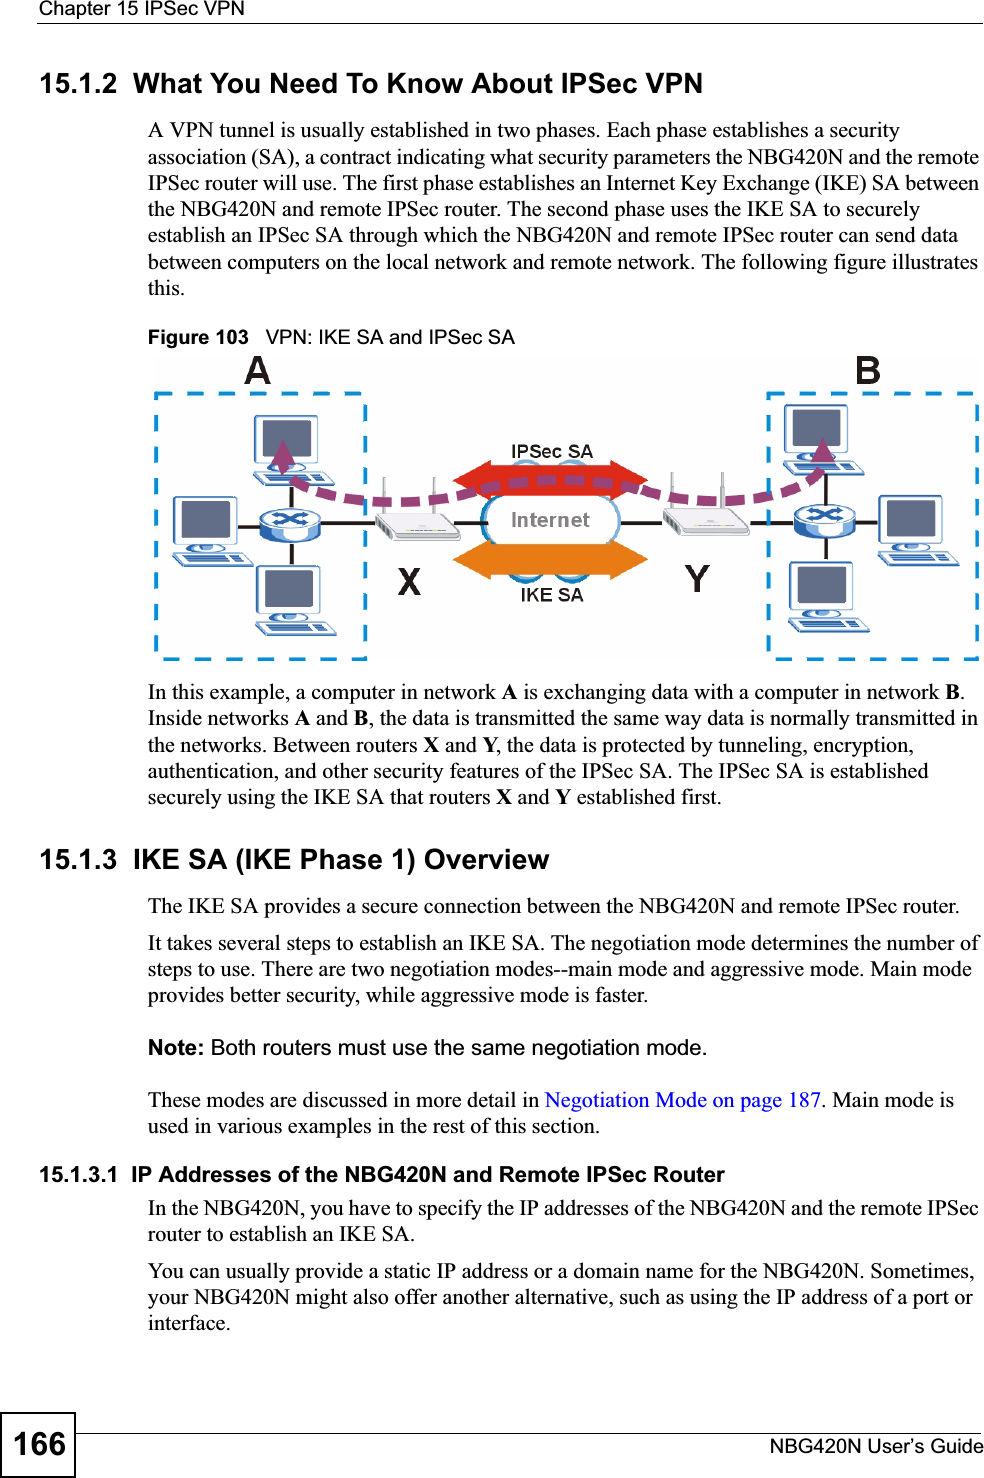 Chapter 15 IPSec VPNNBG420N User’s Guide16615.1.2  What You Need To Know About IPSec VPNA VPN tunnel is usually established in two phases. Each phase establishes a security association (SA), a contract indicating what security parameters the NBG420N and the remote IPSec router will use. The first phase establishes an Internet Key Exchange (IKE) SA between the NBG420N and remote IPSec router. The second phase uses the IKE SA to securely establish an IPSec SA through which the NBG420N and remote IPSec router can send data between computers on the local network and remote network. The following figure illustrates this.Figure 103   VPN: IKE SA and IPSec SA In this example, a computer in network A is exchanging data with a computer in network B.Inside networks A and B, the data is transmitted the same way data is normally transmitted in the networks. Between routers X and Y, the data is protected by tunneling, encryption, authentication, and other security features of the IPSec SA. The IPSec SA is established securely using the IKE SA that routers X and Y established first.15.1.3  IKE SA (IKE Phase 1) OverviewThe IKE SA provides a secure connection between the NBG420N and remote IPSec router.It takes several steps to establish an IKE SA. The negotiation mode determines the number of steps to use. There are two negotiation modes--main mode and aggressive mode. Main mode provides better security, while aggressive mode is faster.Note: Both routers must use the same negotiation mode.These modes are discussed in more detail in Negotiation Mode on page 187. Main mode is used in various examples in the rest of this section.15.1.3.1  IP Addresses of the NBG420N and Remote IPSec RouterIn the NBG420N, you have to specify the IP addresses of the NBG420N and the remote IPSec router to establish an IKE SA.You can usually provide a static IP address or a domain name for the NBG420N. Sometimes, your NBG420N might also offer another alternative, such as using the IP address of a port or interface.